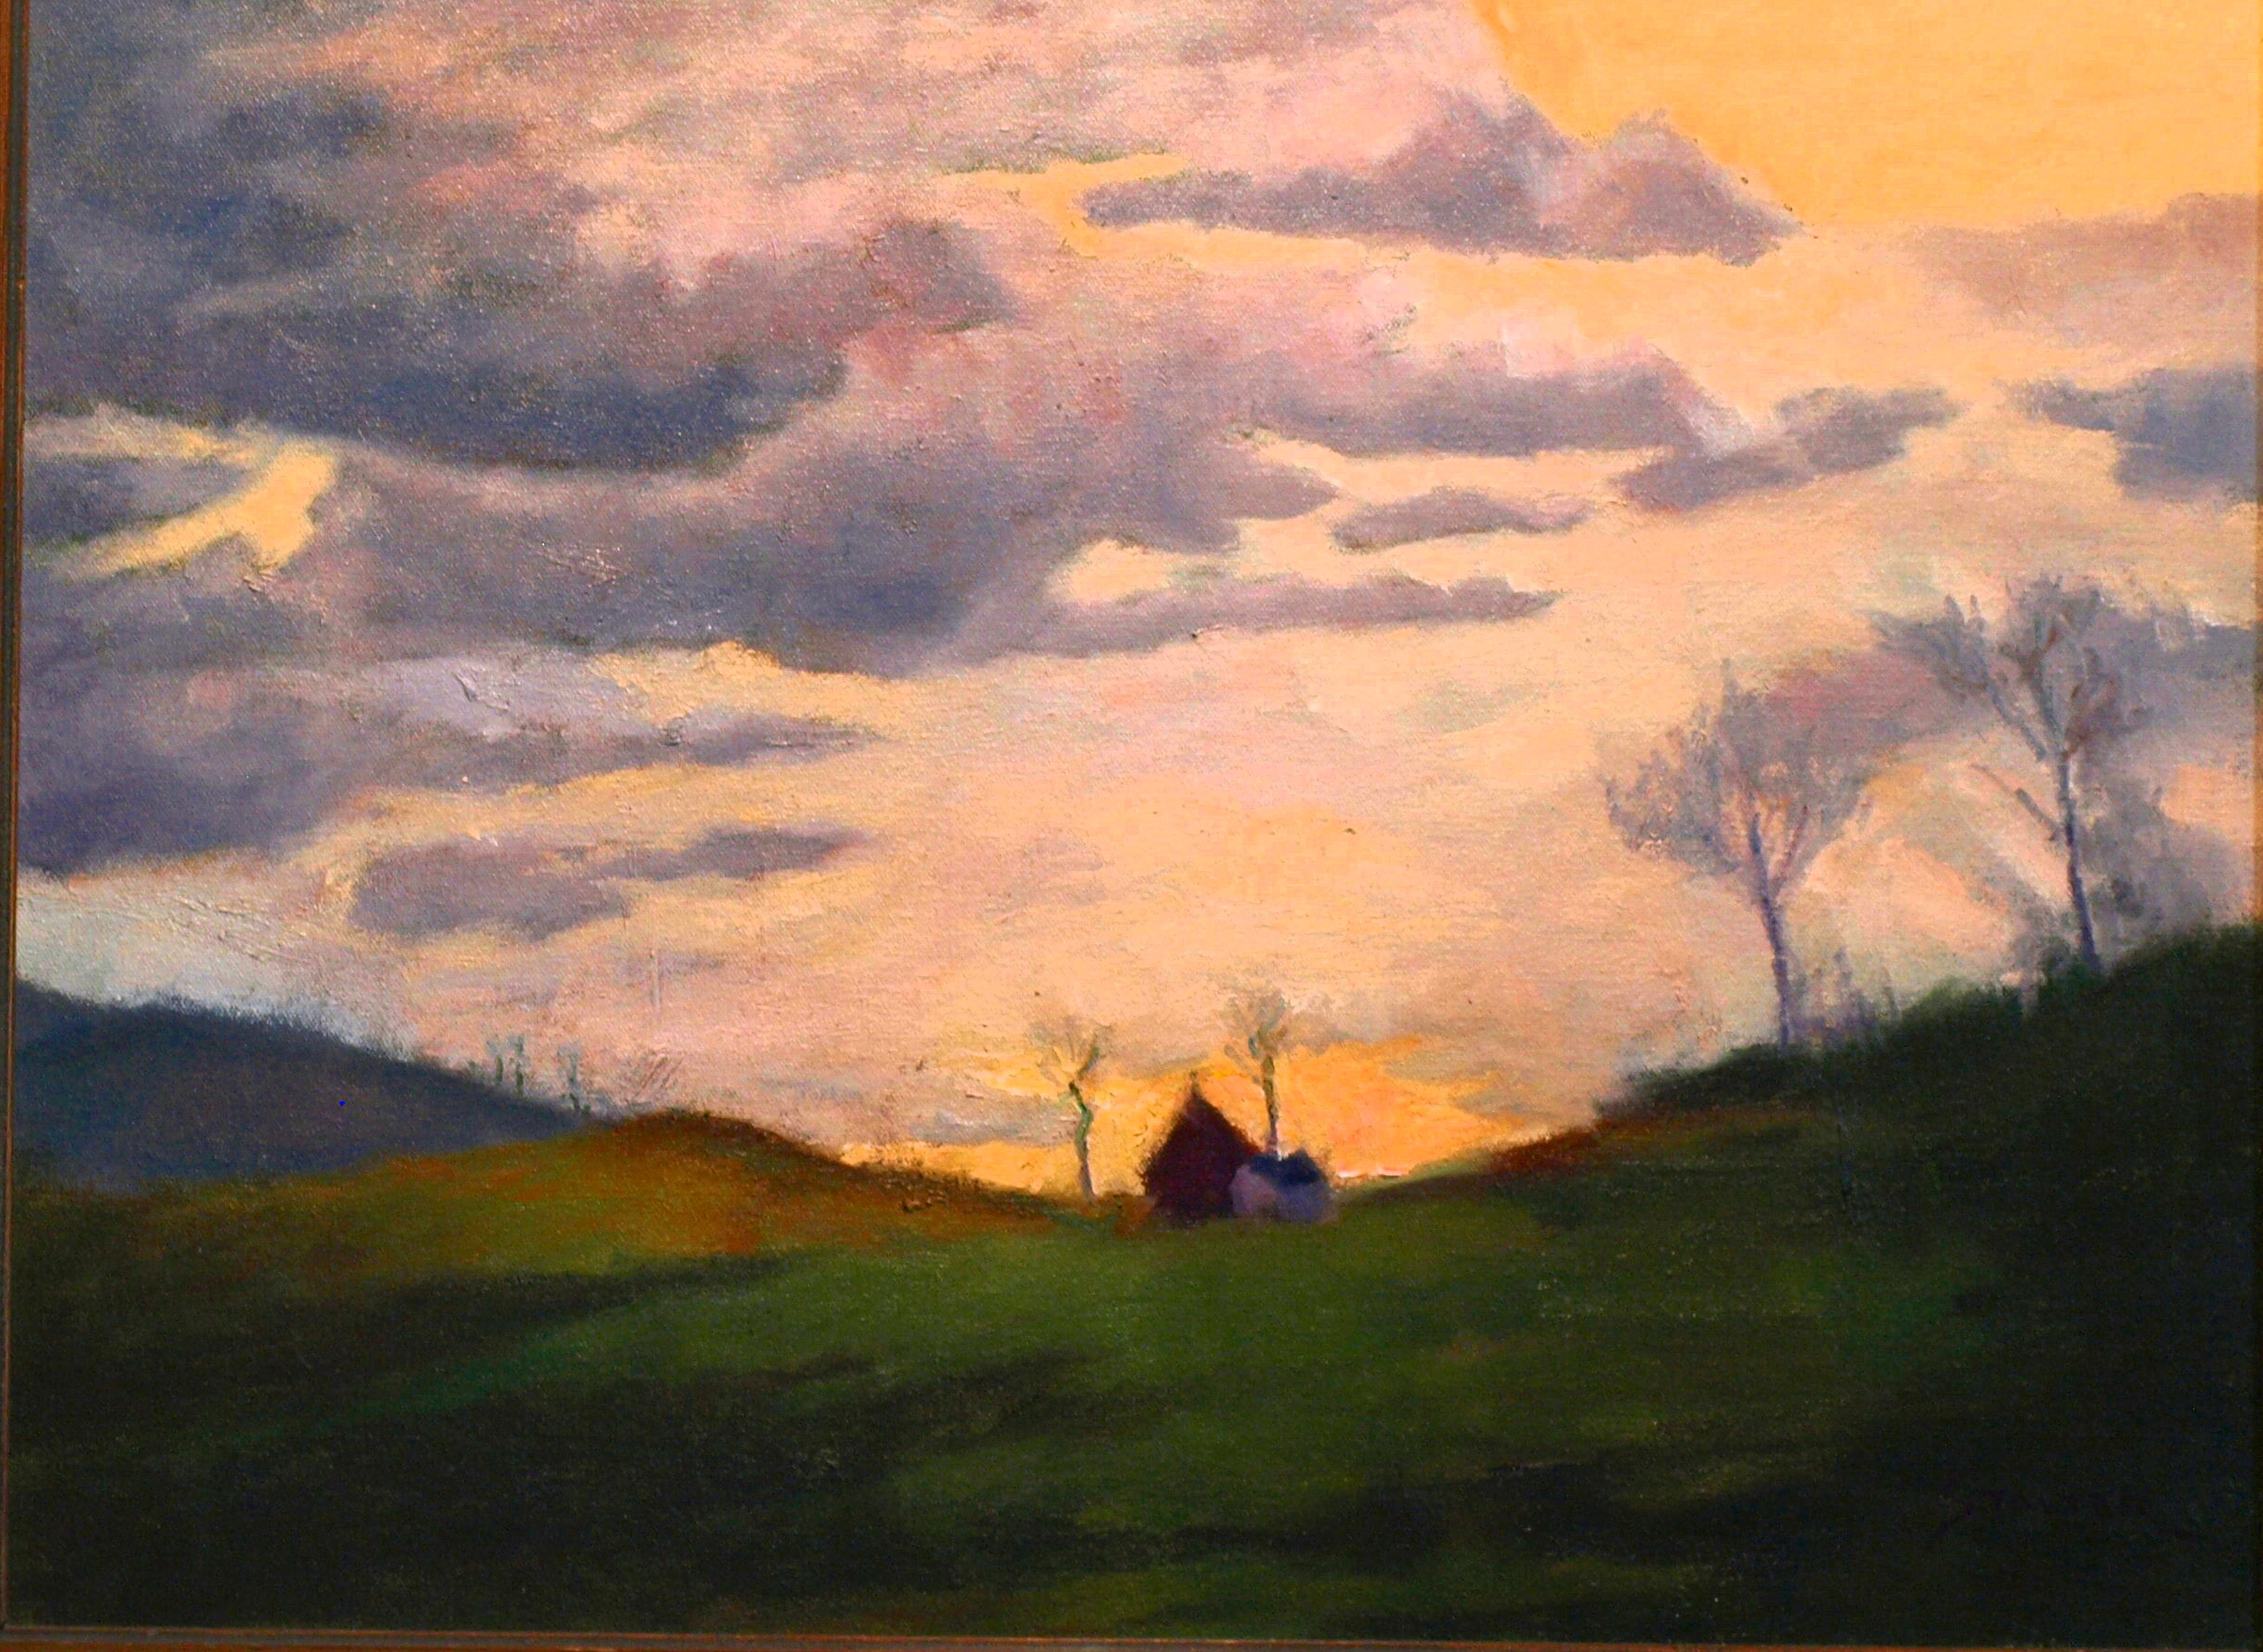 Farm on the Hill, Oil on Canvas, 20 x 24 Inches, by Richard Stalter, $750